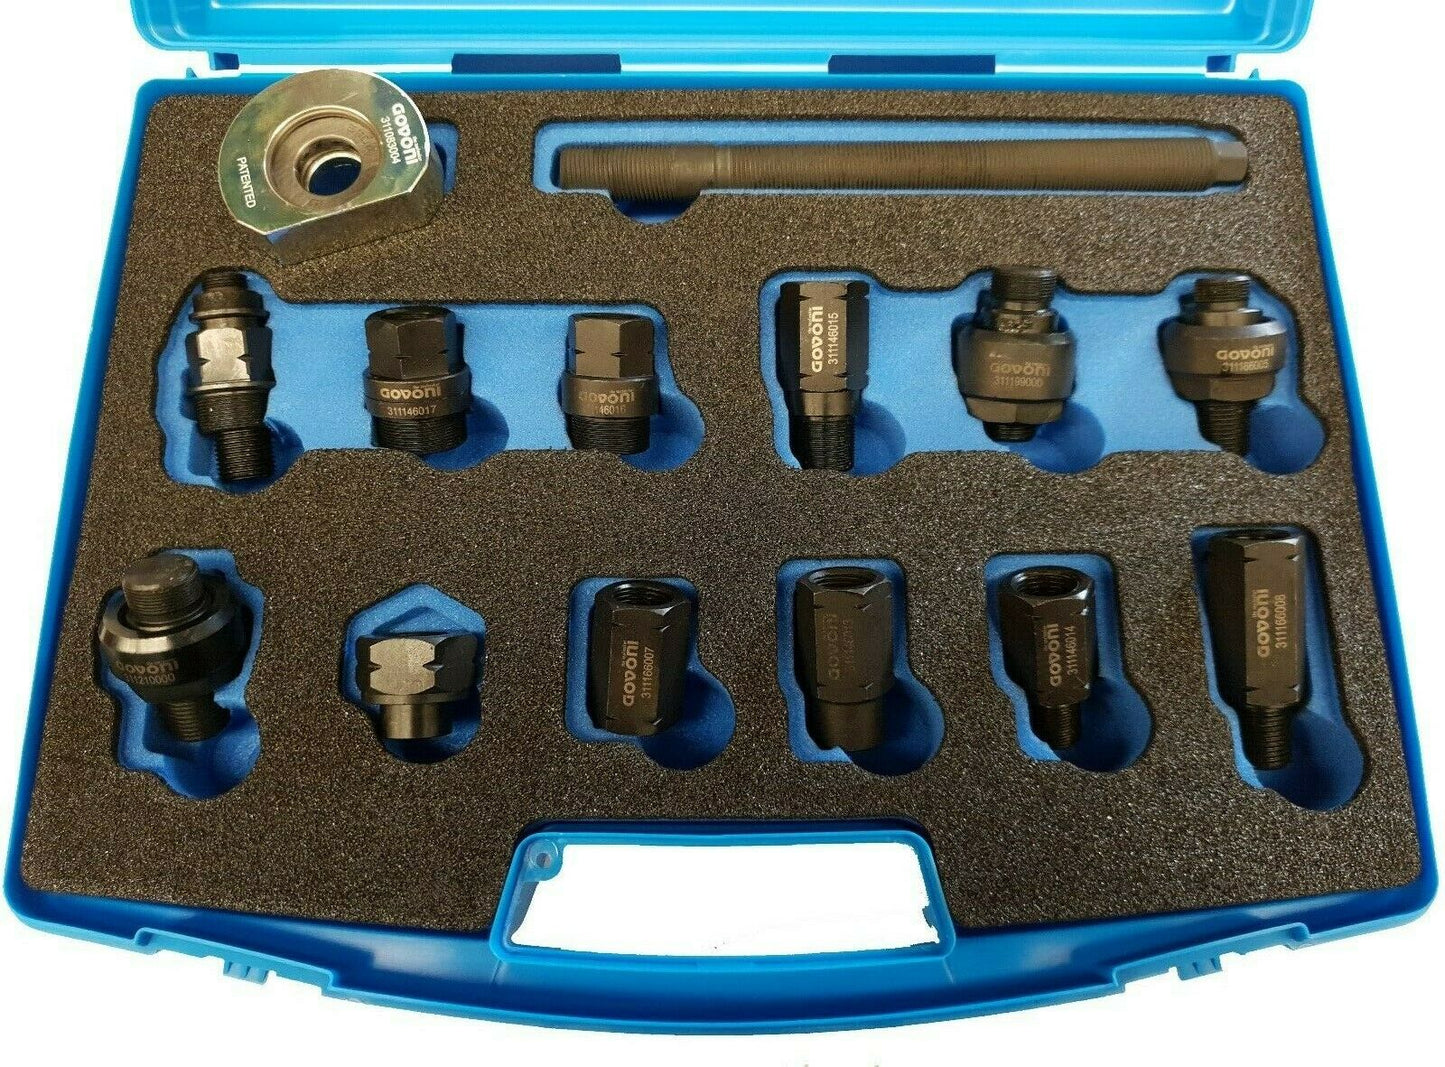 Govoni Diesel Injector Adaptor And Puller Set For Seized Injectors BOSCH, DENSO & SIEMENS - Specialist Tools Australia